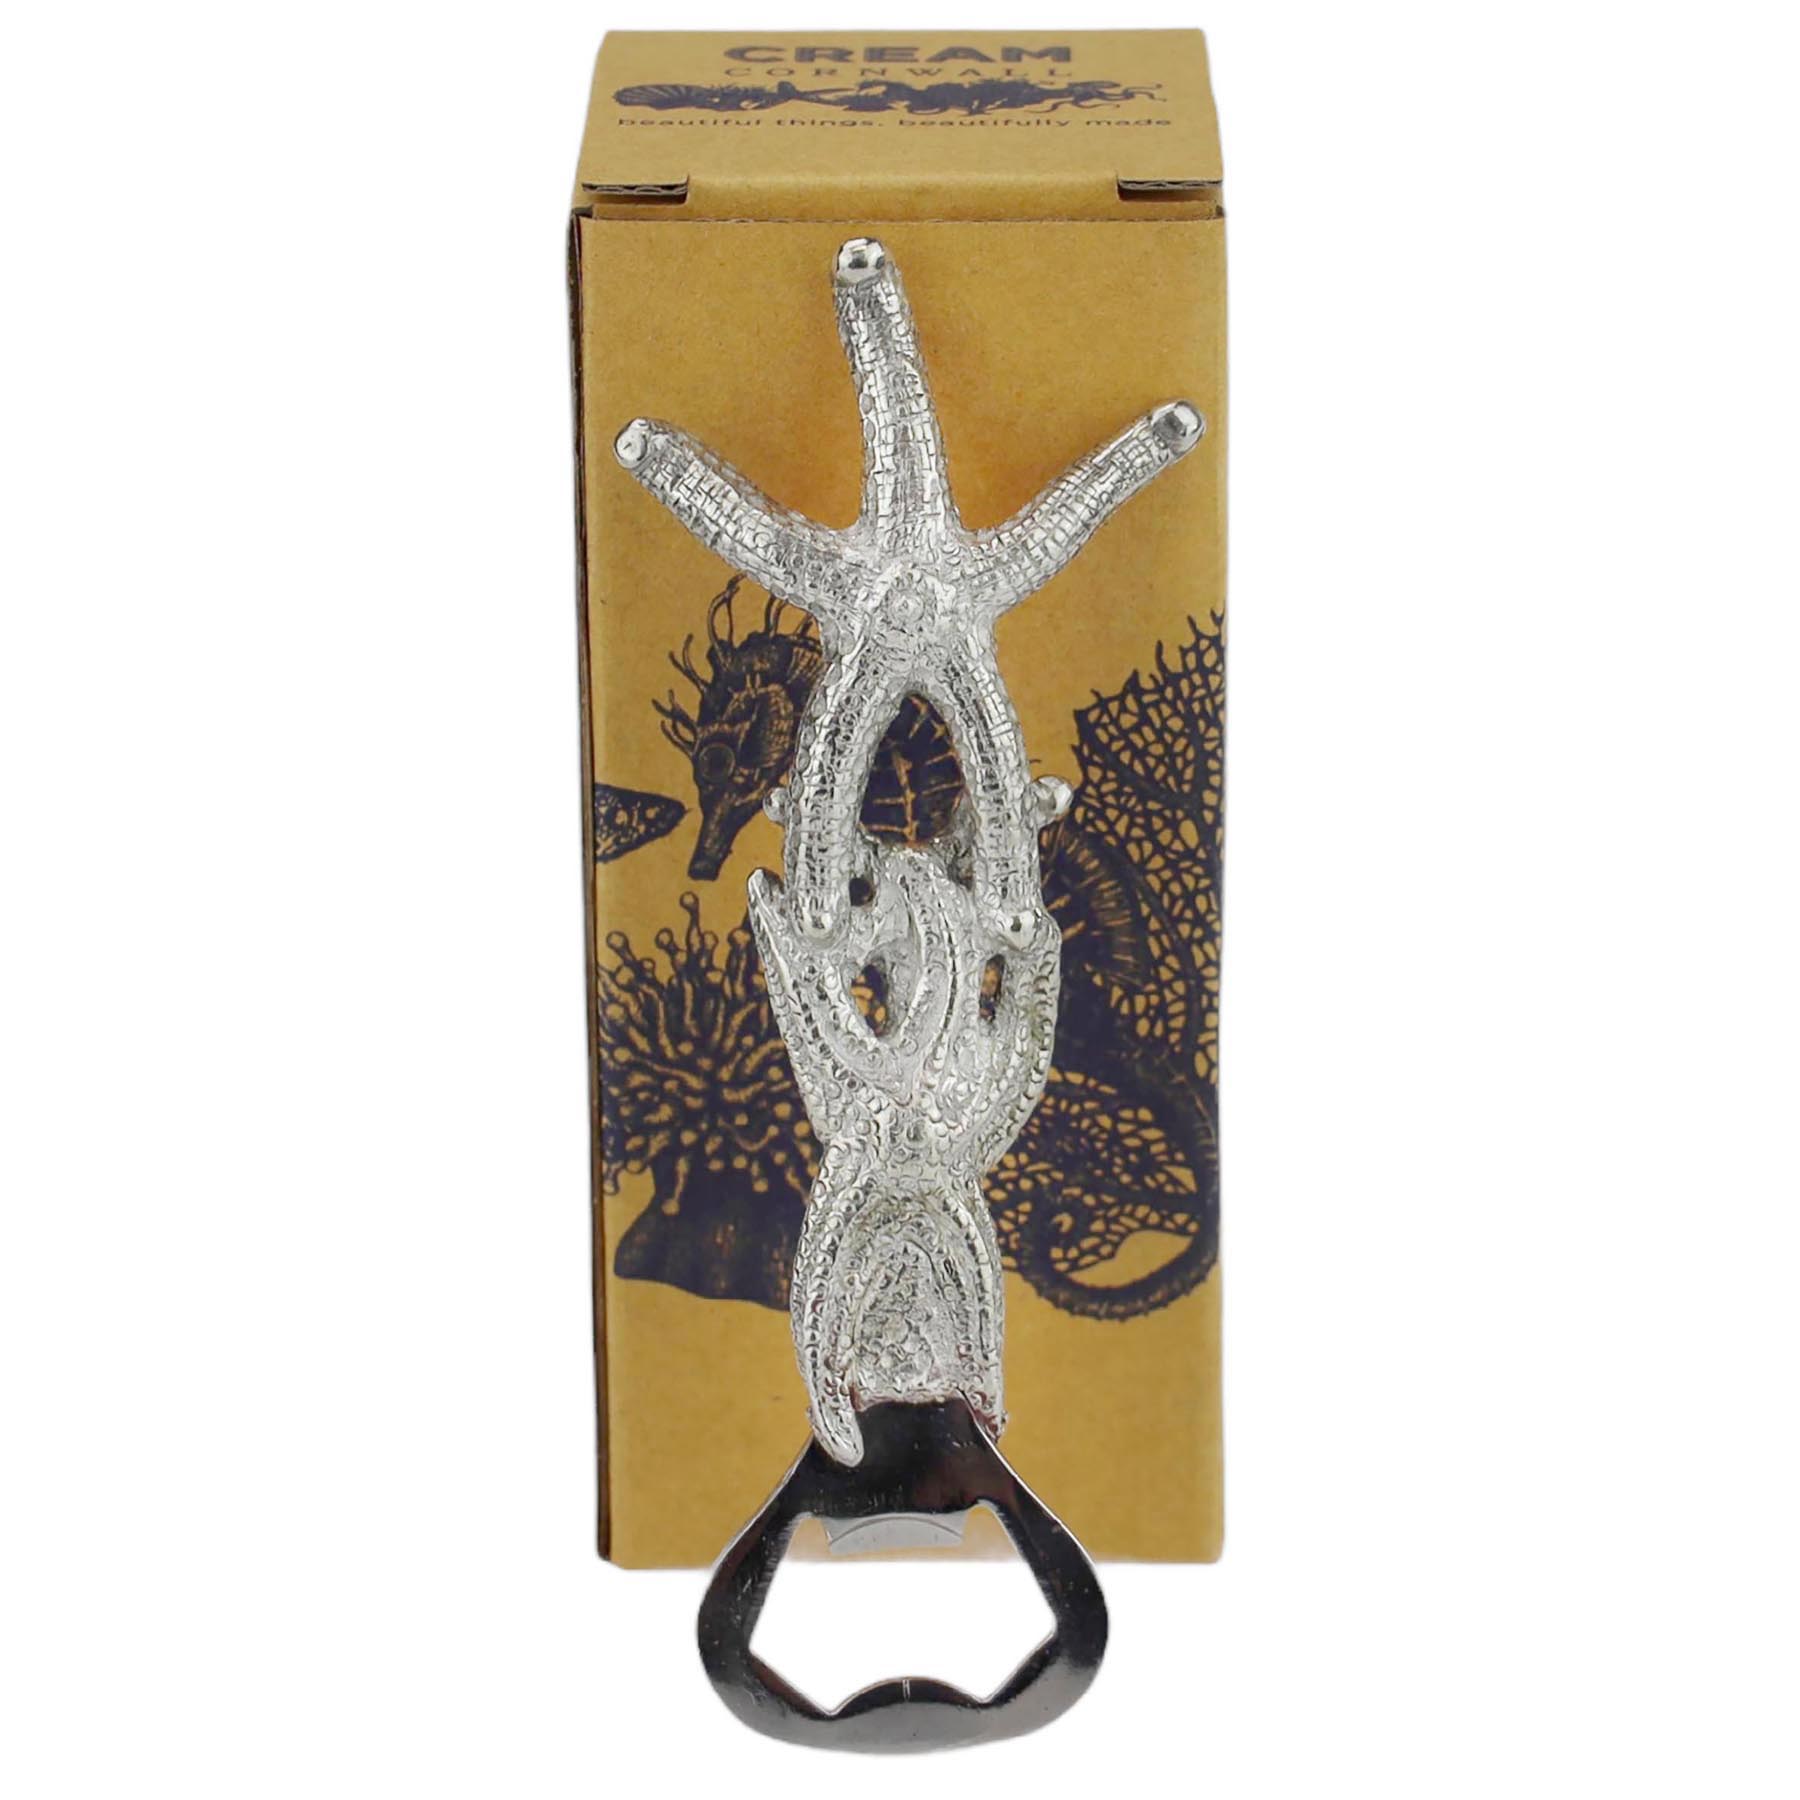 Pewter Starfish Bottle Opener in front of a cream cornwall box